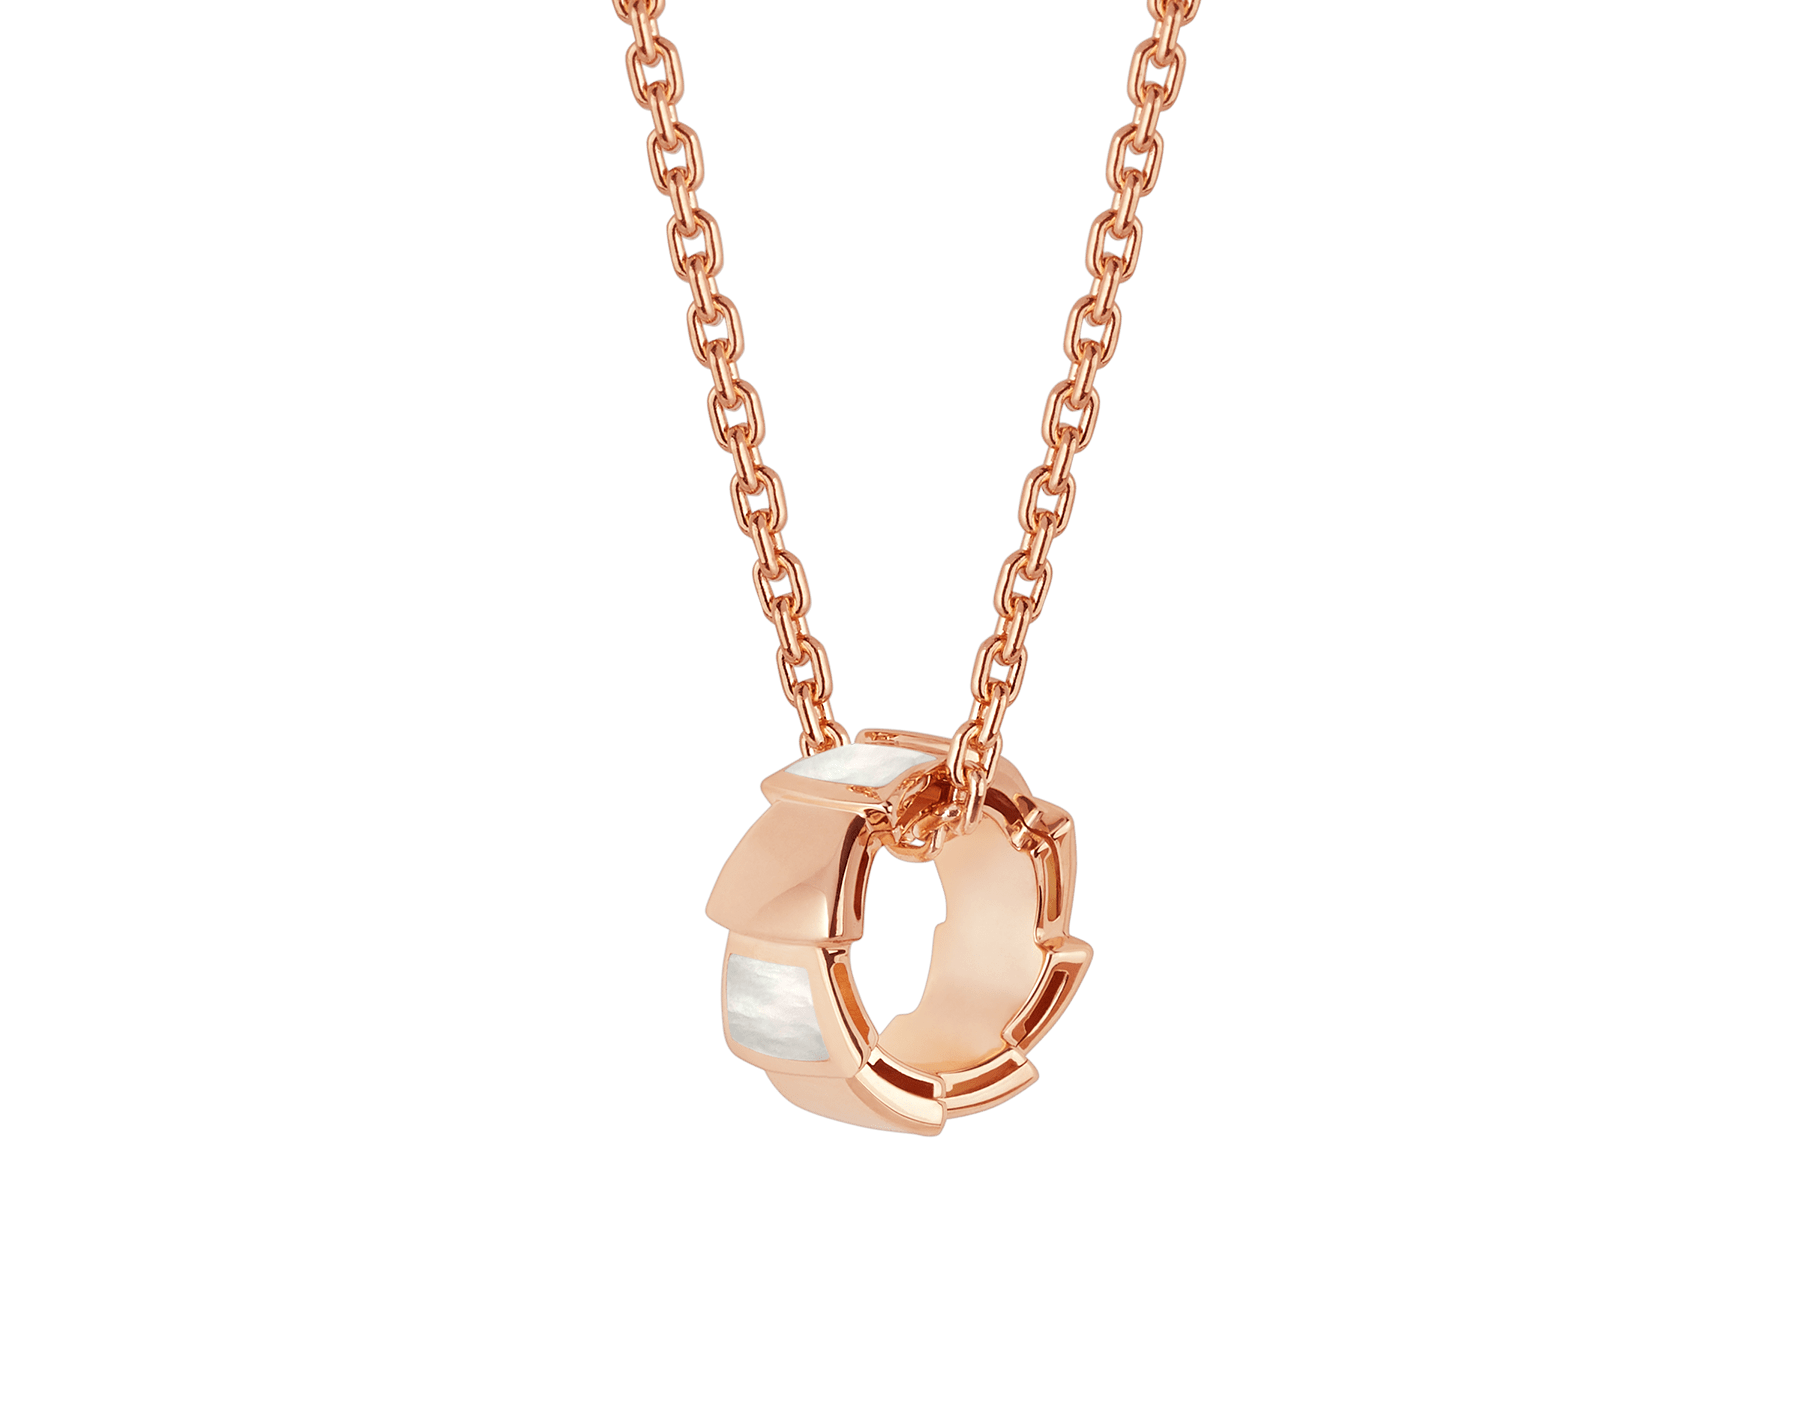 Wholesale OEM design jewelry 18 kt rose gold necklace with OEM/ODM Jewelry pendant set with mother-of-pearl elements